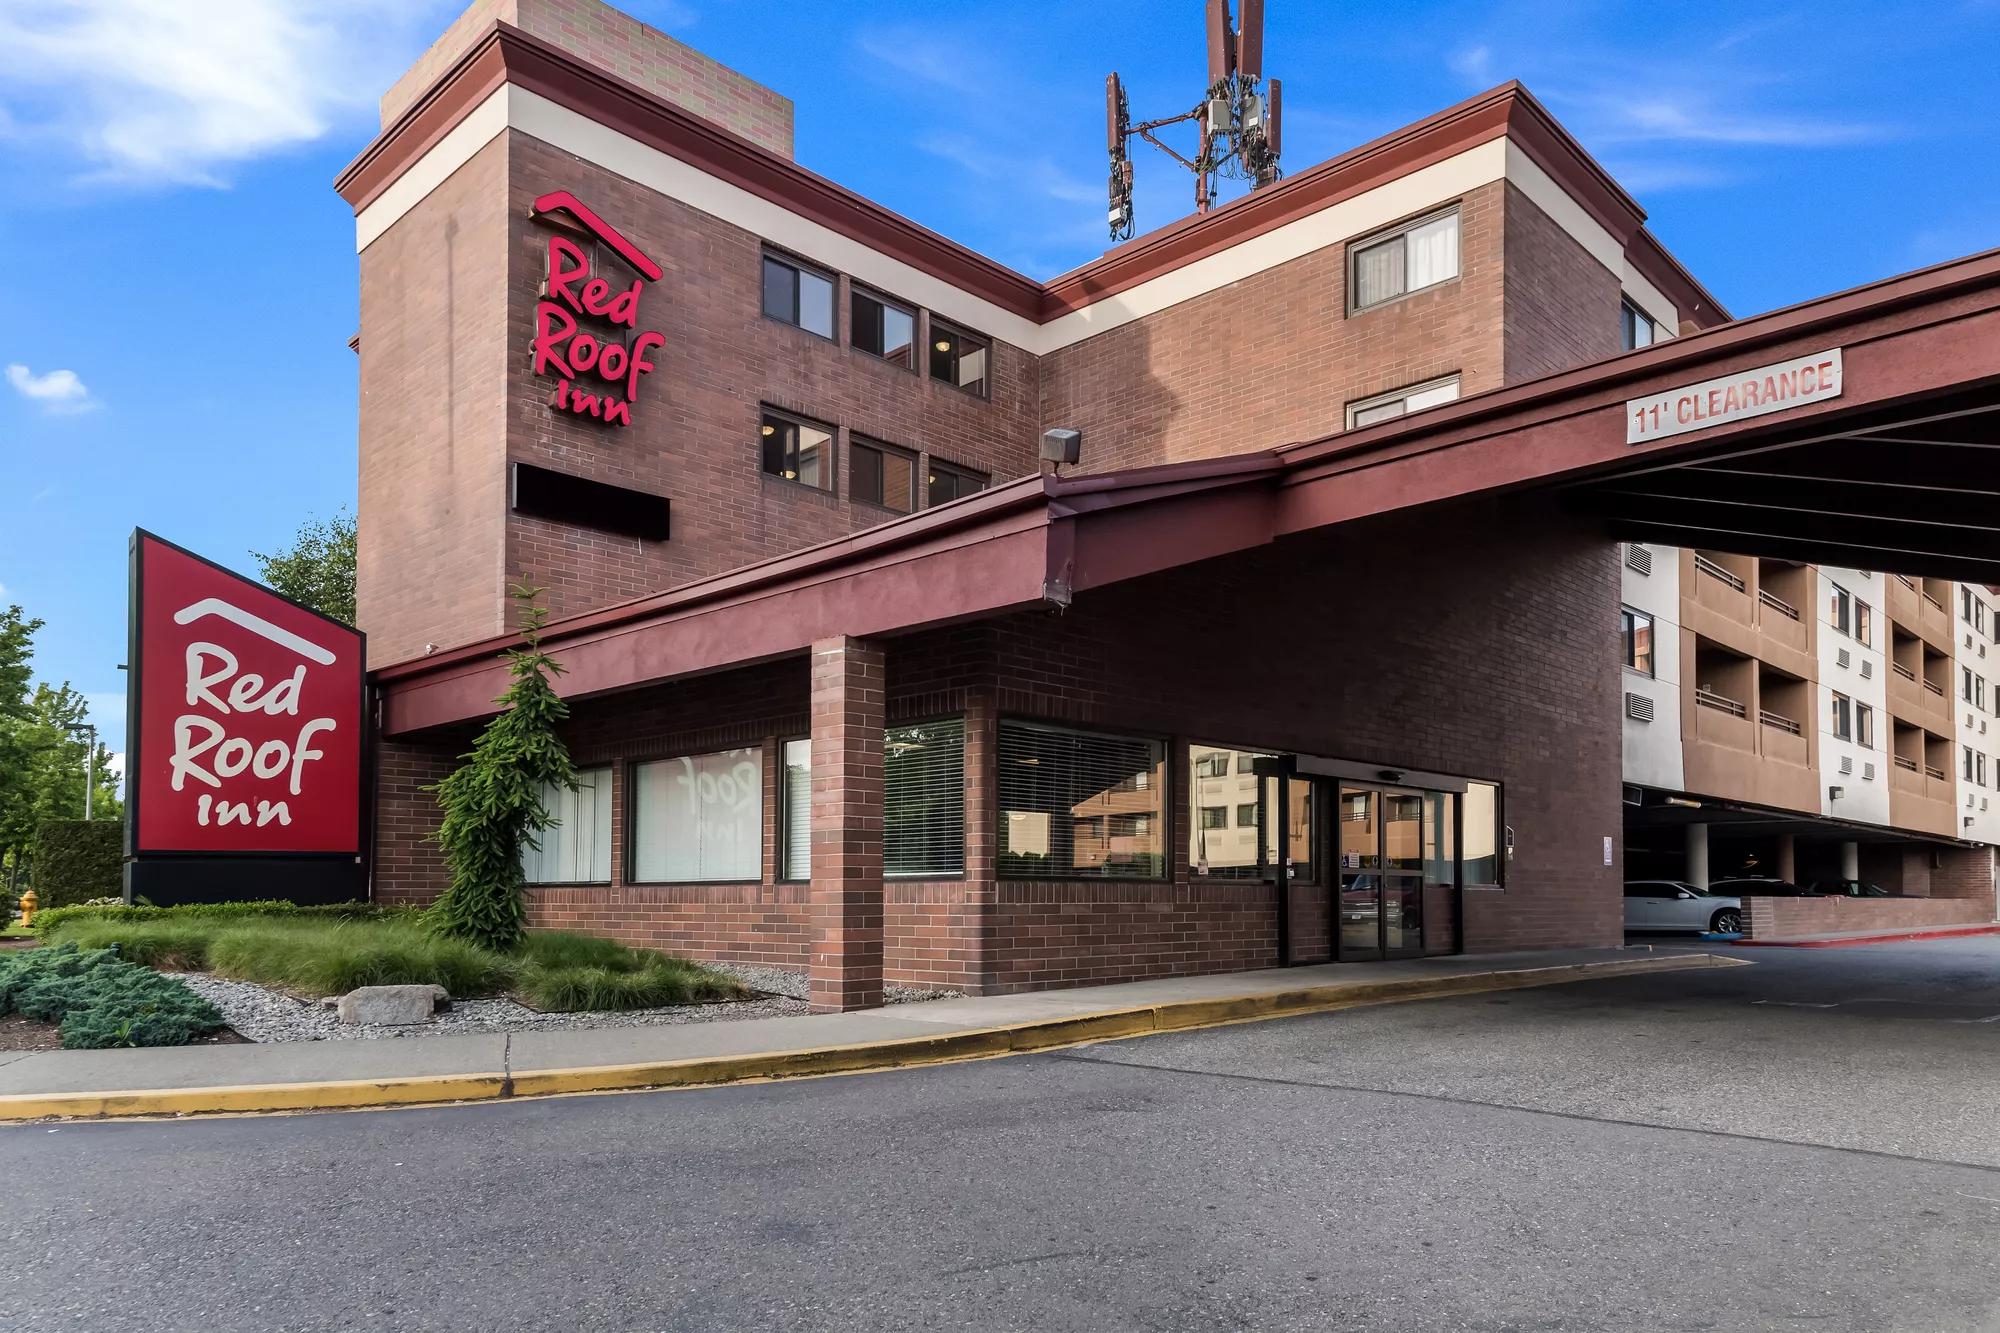 Red Roof Inn Seattle Airport - SEATAC Property Exterior Image